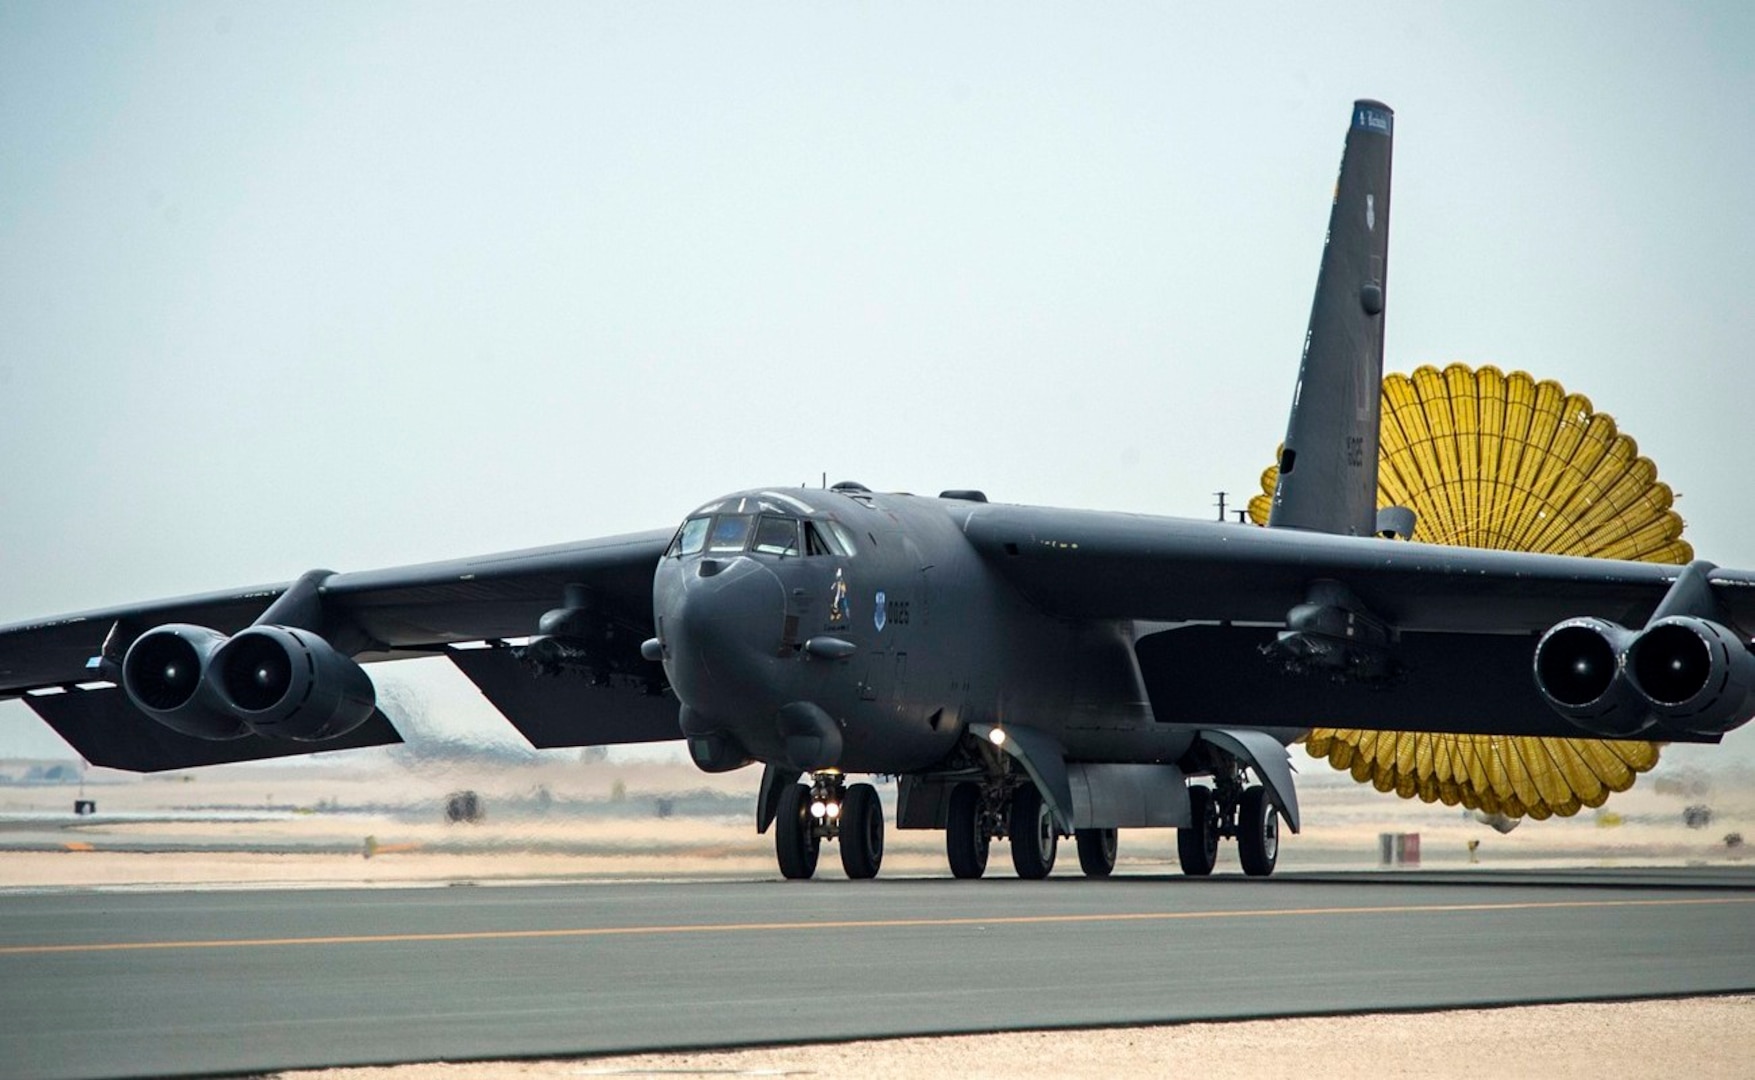 U.S. Air Force B-52 Stratofortress aircraft from Barksdale Air Force Base, Louisiana, arrives at Al Udeid Air Base, Qatar, April 9, 2016 in support of Operation Inherent Resolve, the operation to eliminate Da’esh and the threat they pose to Iraq, Syria and the wider international community, and as needed in the region.  (U.S. Air Force photo by Tech. Sgt. Nathan Lipscomb)